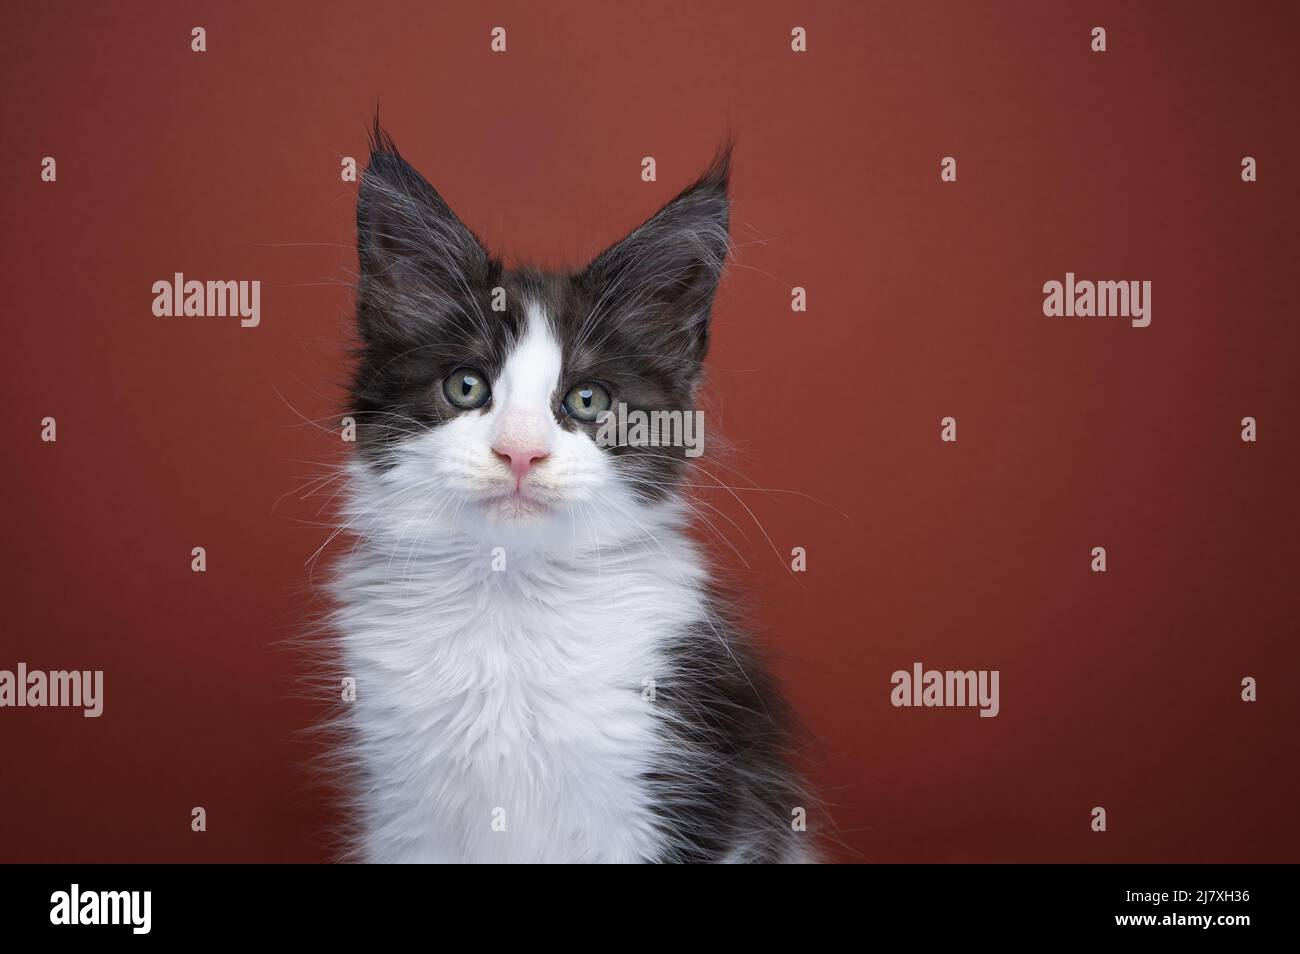 tuxedo maine coon kitten portrait on red brown background with copy space Stock Photo